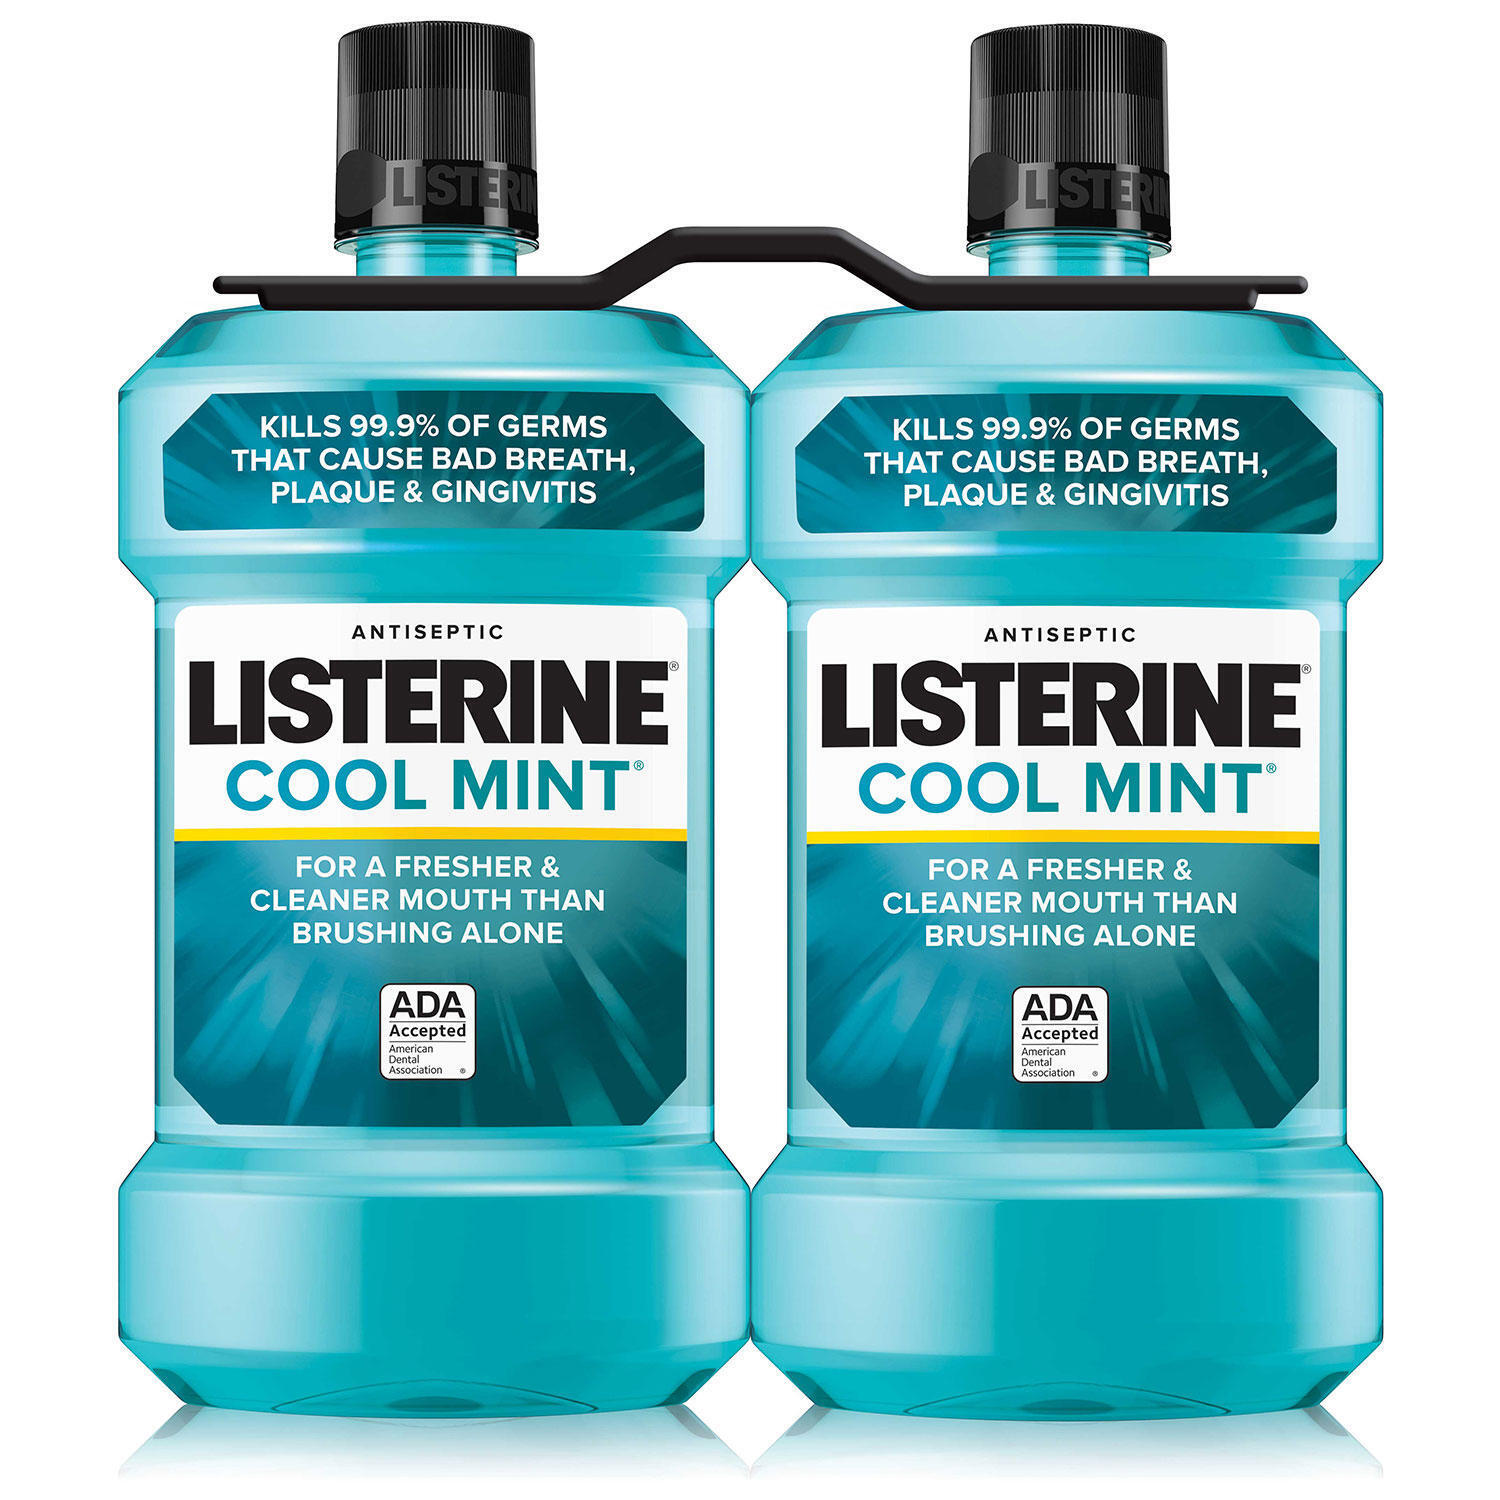 Listerine CoolMint Antiseptic (1.5L, 2 pk.)_Free Shipping.